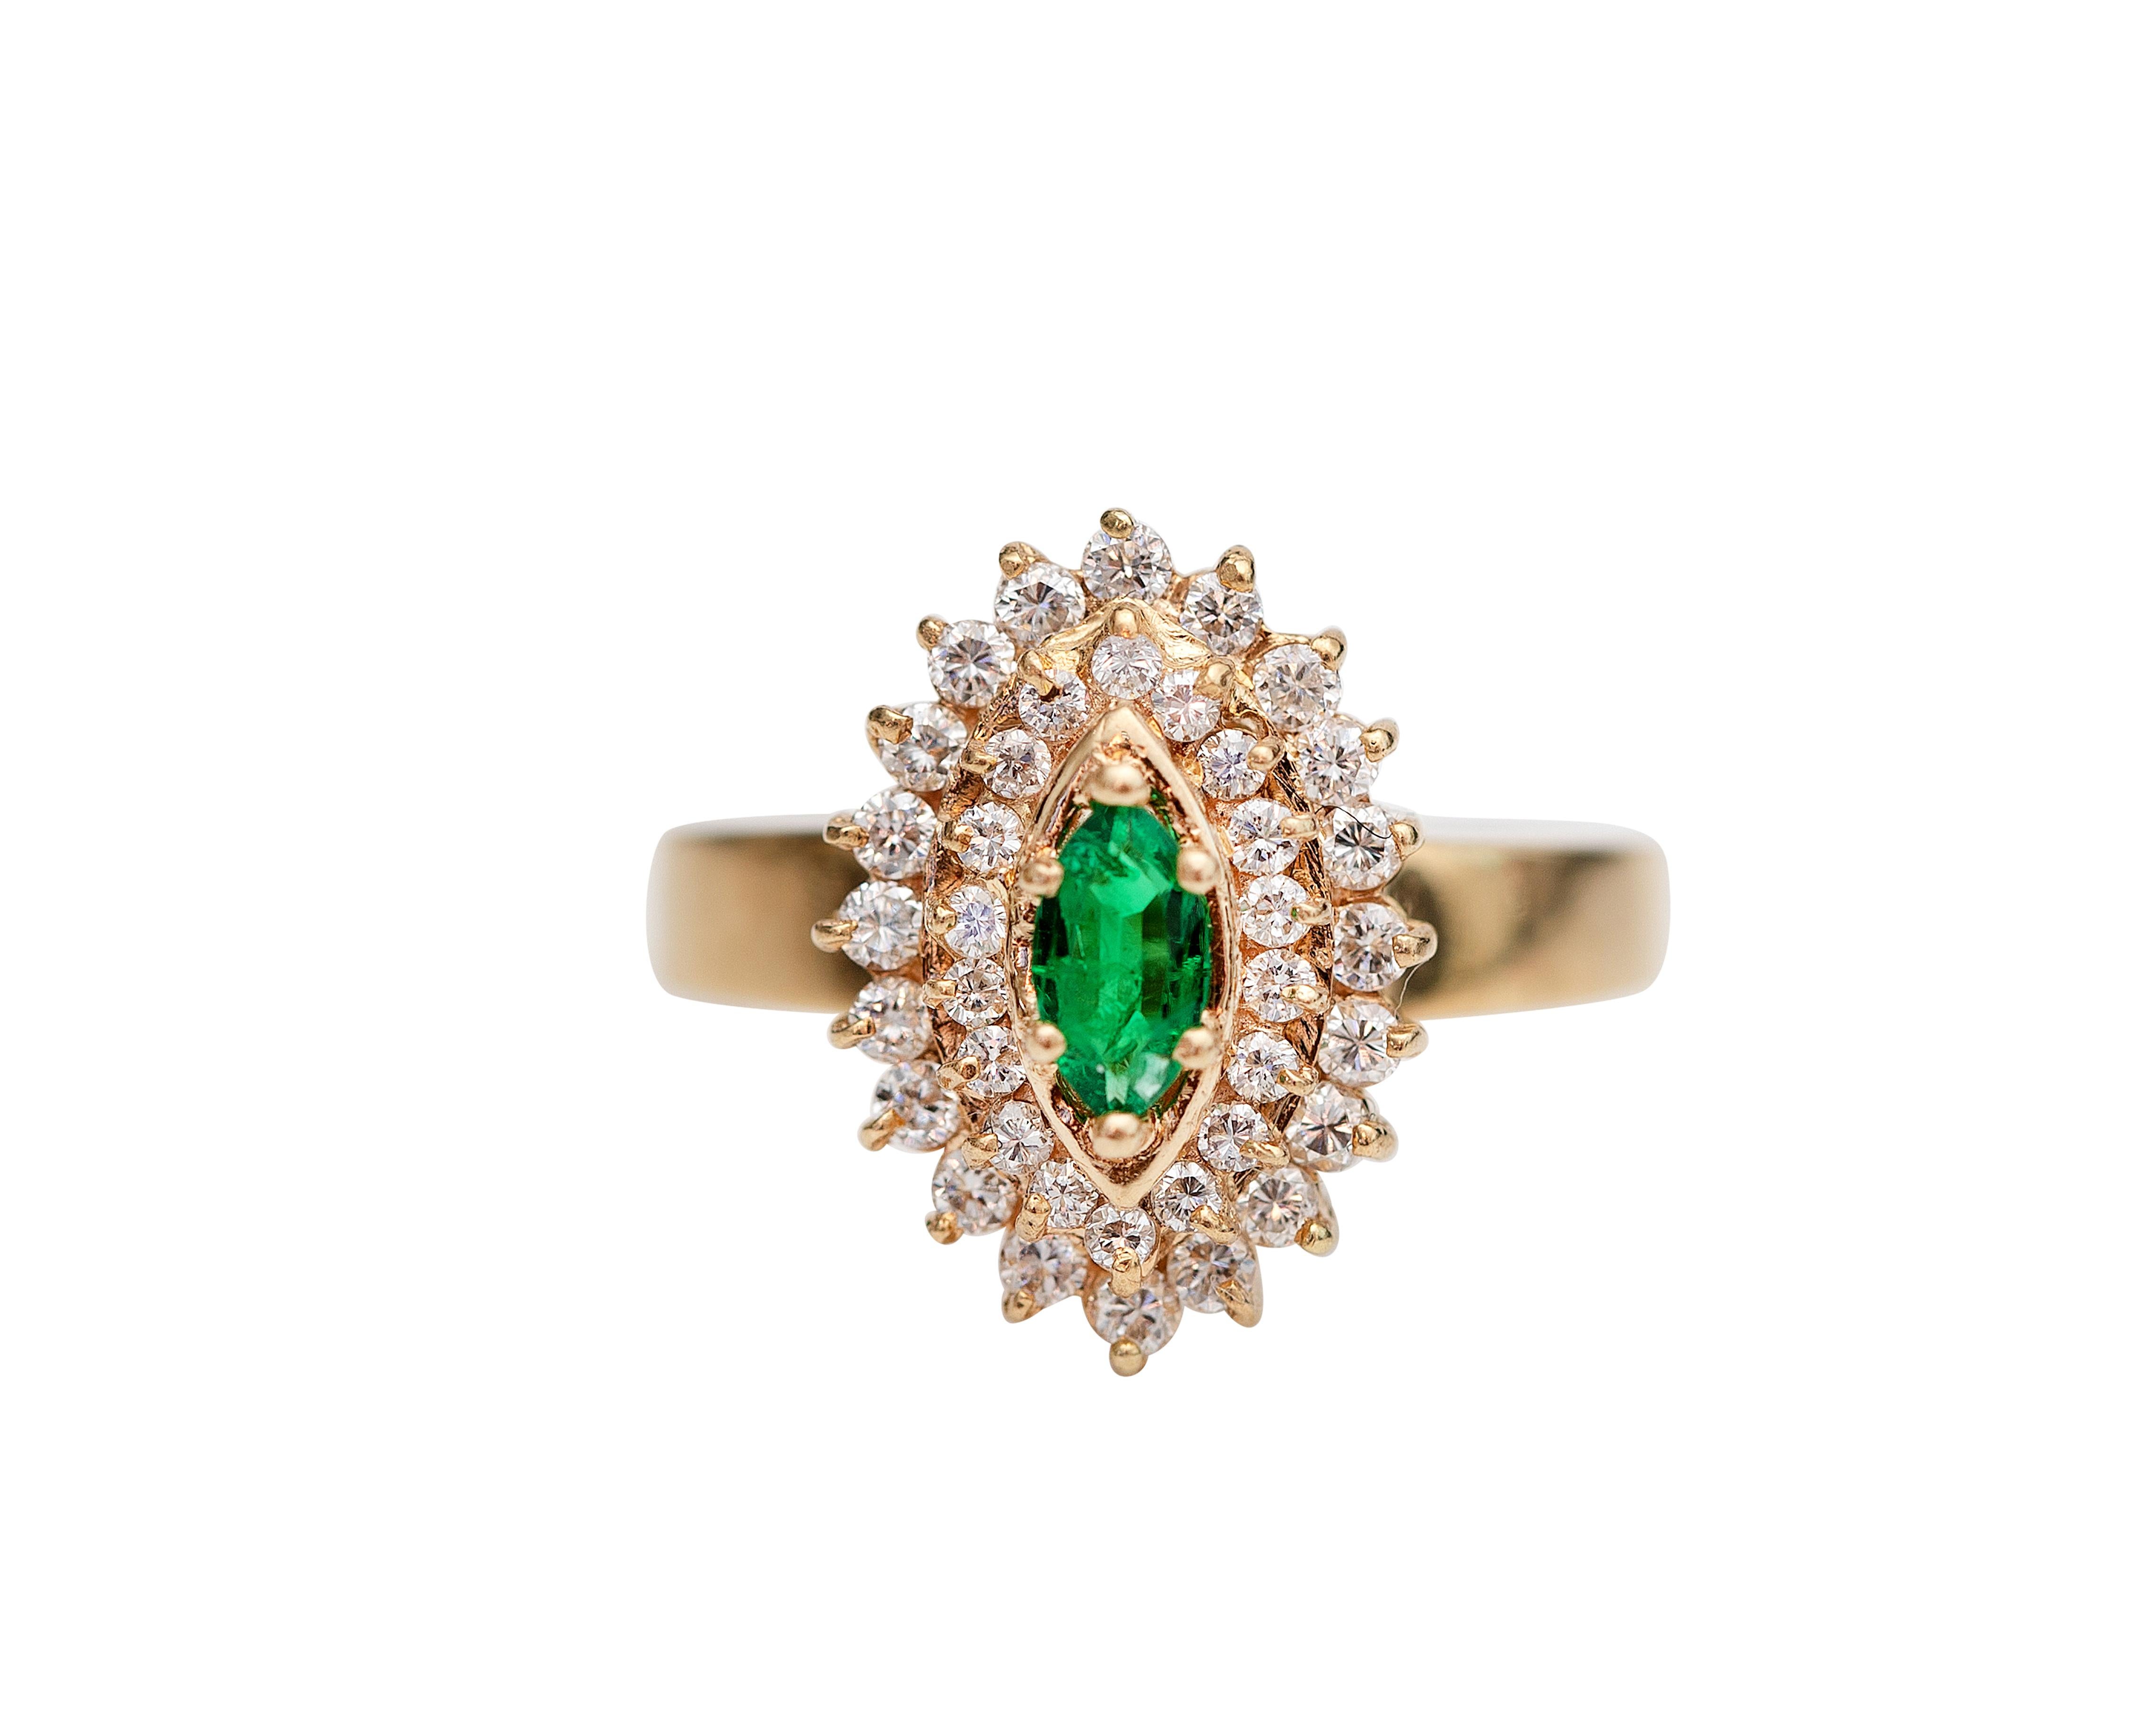 Lovely diamond and emerald ring from the 1980s crafted in beautiful 18 karat yellow gold. The emerald, 6 prong-set, is a beautiful marquise cut, weighing 1.25 carats, and features the most incredible green vibrancy colors. It is surrounded by 3